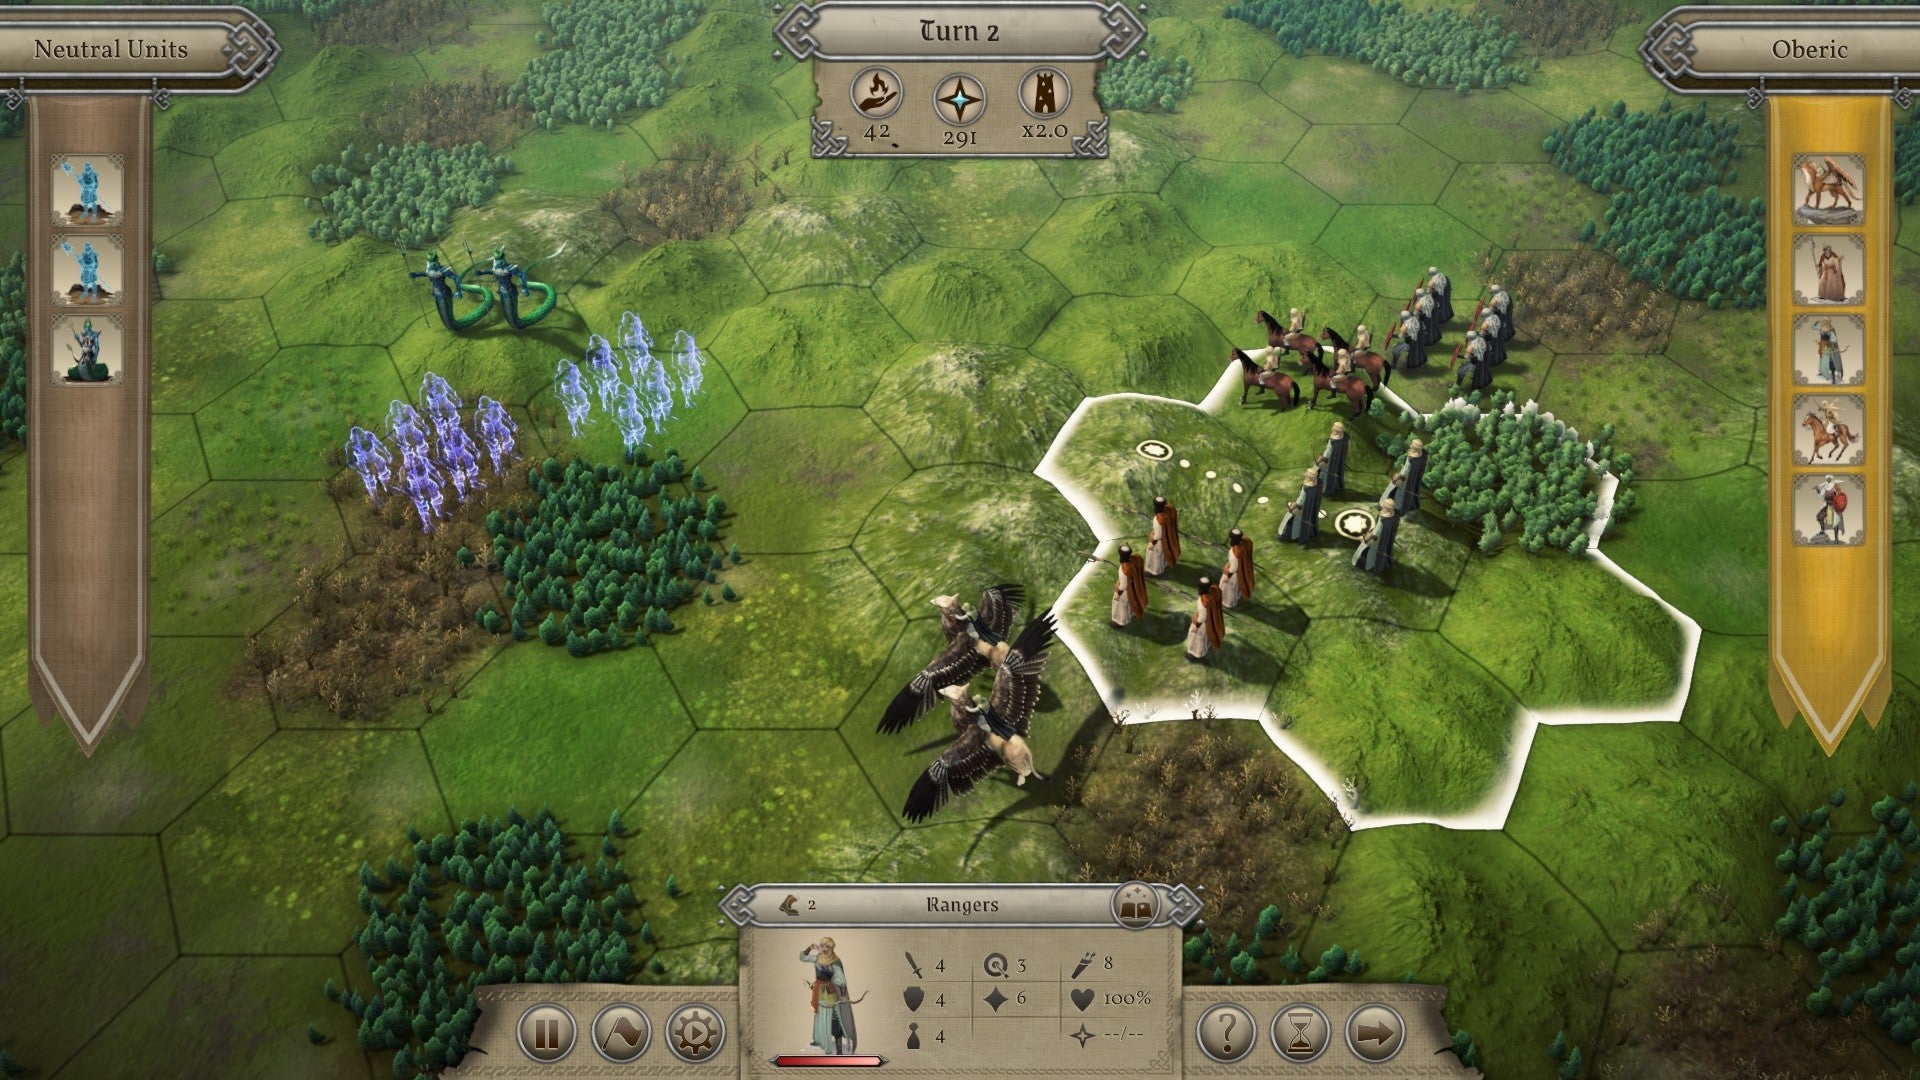 A hexagonal field with two opposing armies in Masters Of Magic